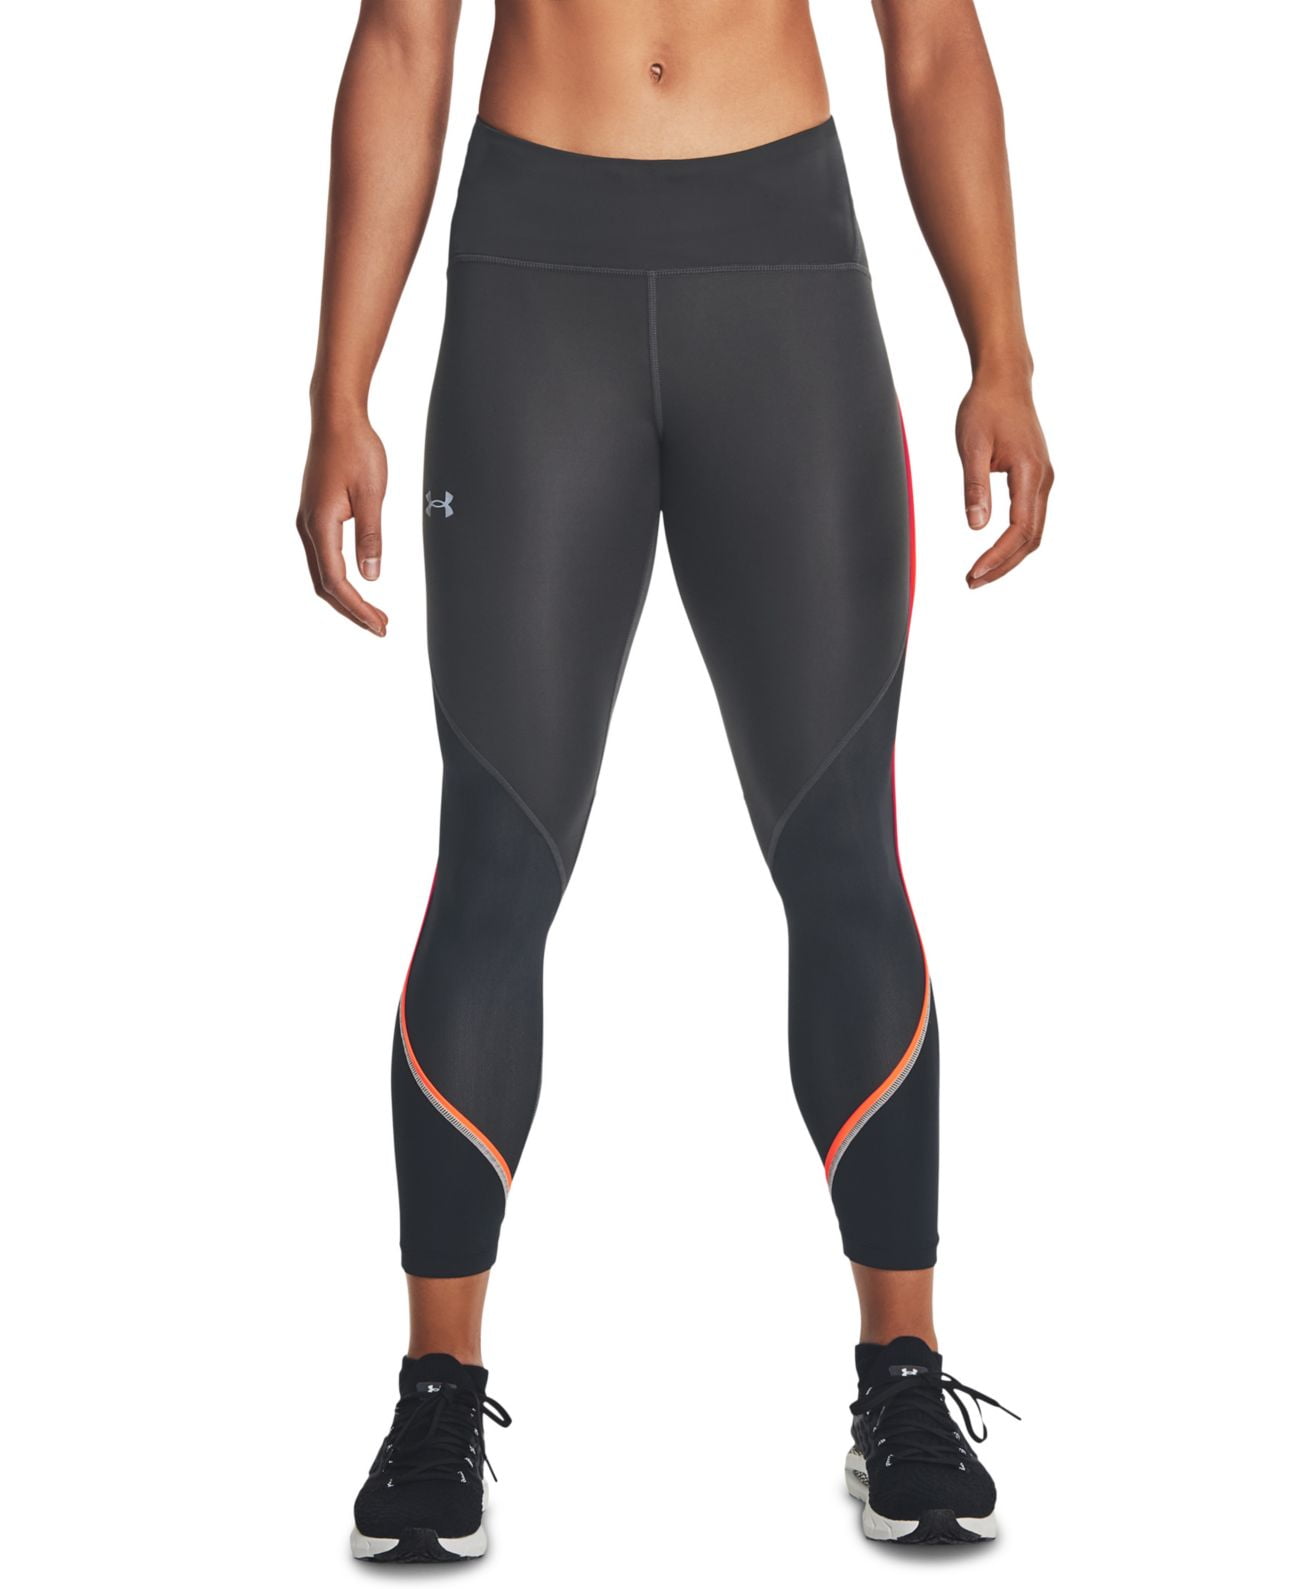 Under Armour Fly Fast Mesh Panel Athletic Leggings,Jet Gray,X-Large - Walmart.com